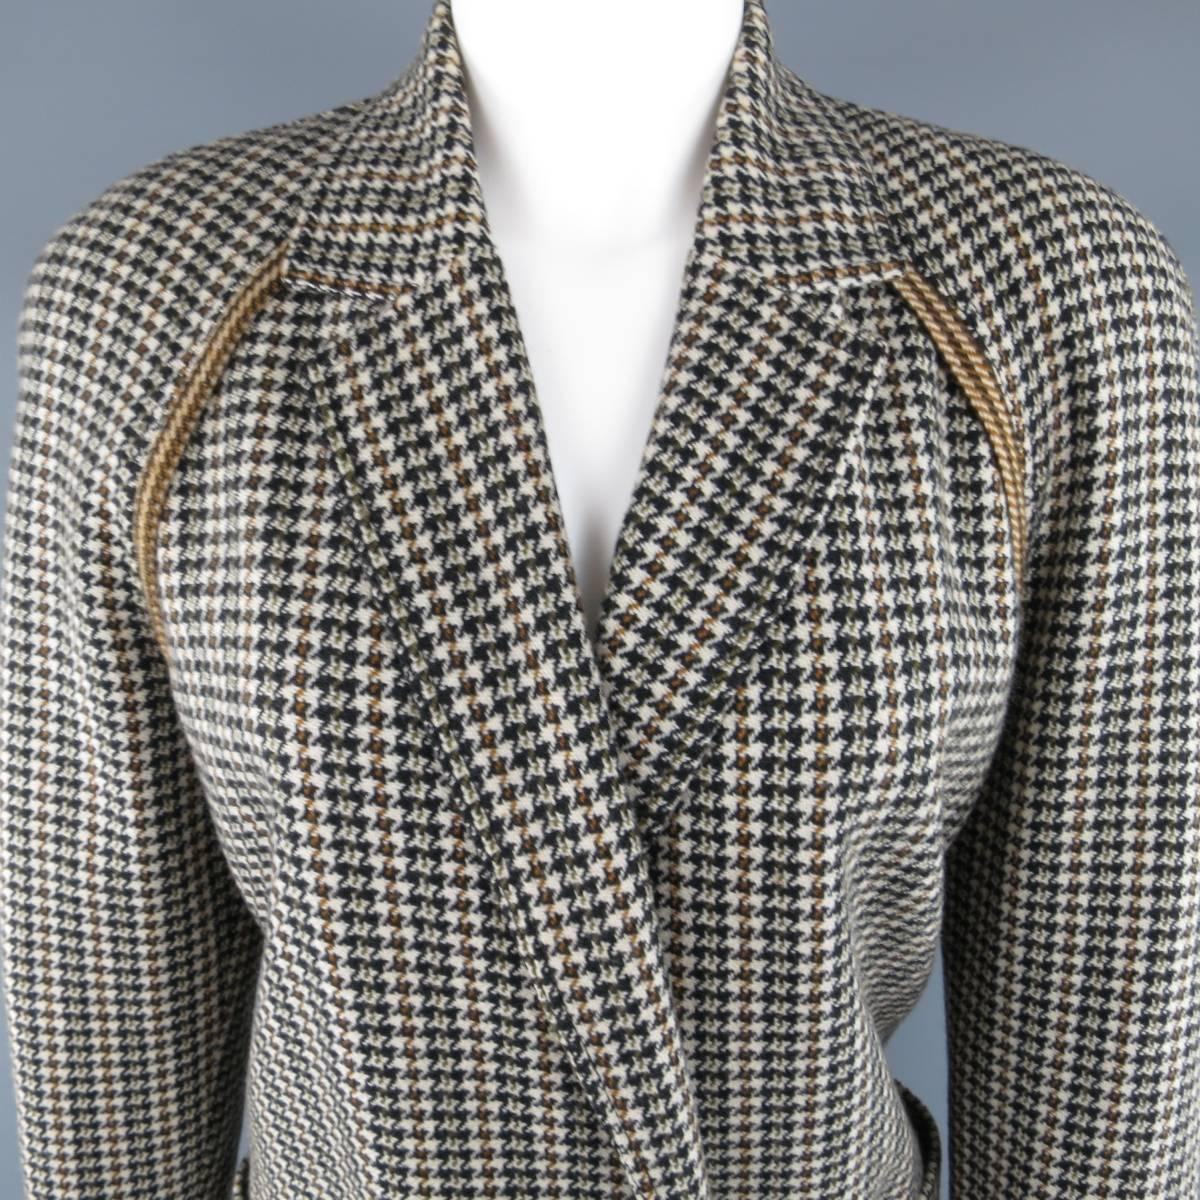 Vintage 1980s GIANNI VERSACE jacket comes in a beige houndstooth print with hues of olive green, brown, and black and features a notch lapel, double breasted button closure, and raglan sleeves with tan plaid trim. Made in Italy.
 
Excellent